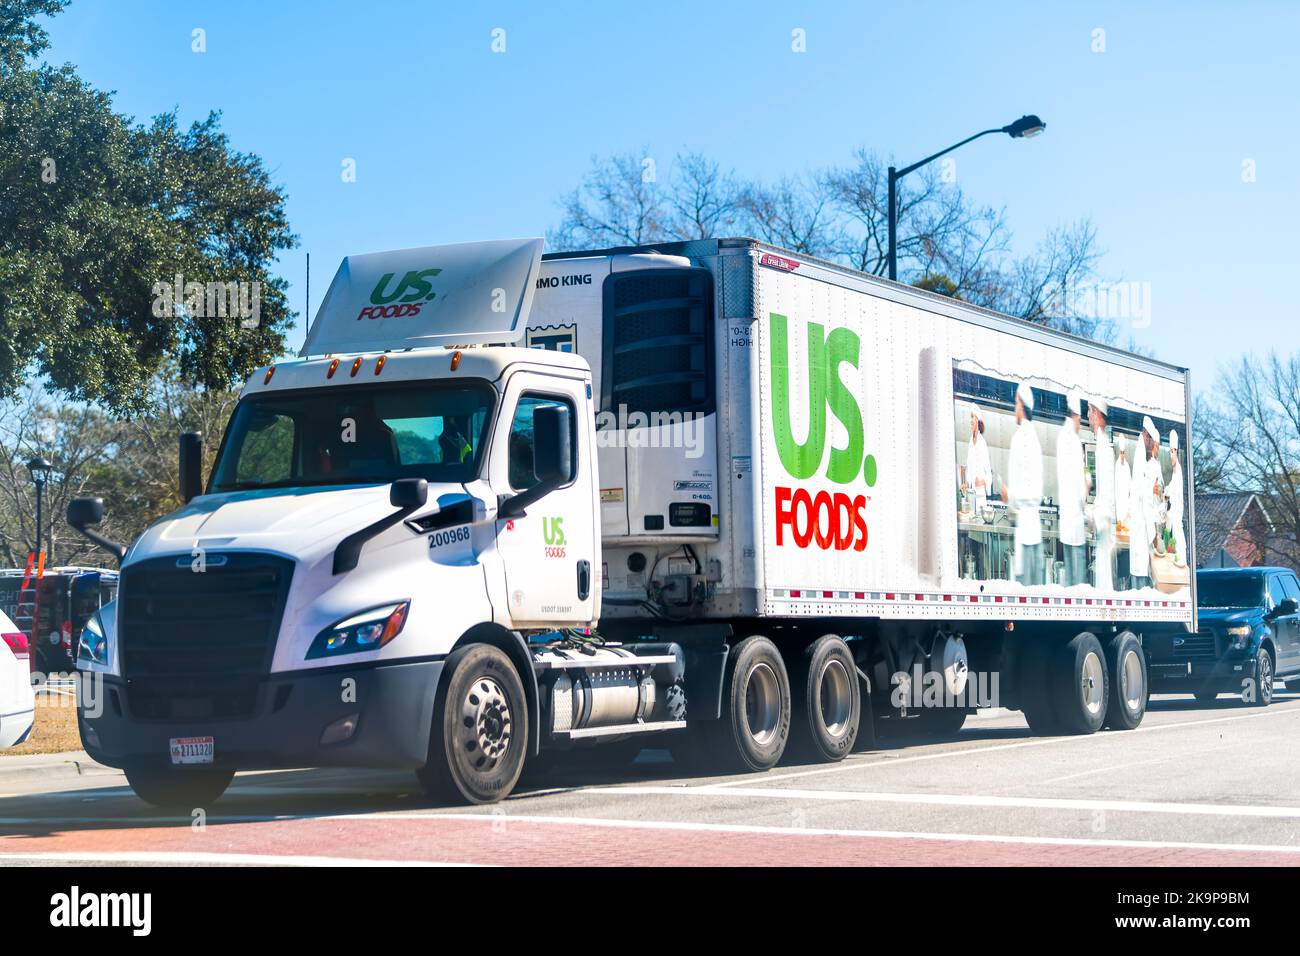 Jamestown, USA - February 3, 2021: US Foods food delivery distribution truck car vehicle with trailer transporting products in South Carolina Stock Photo